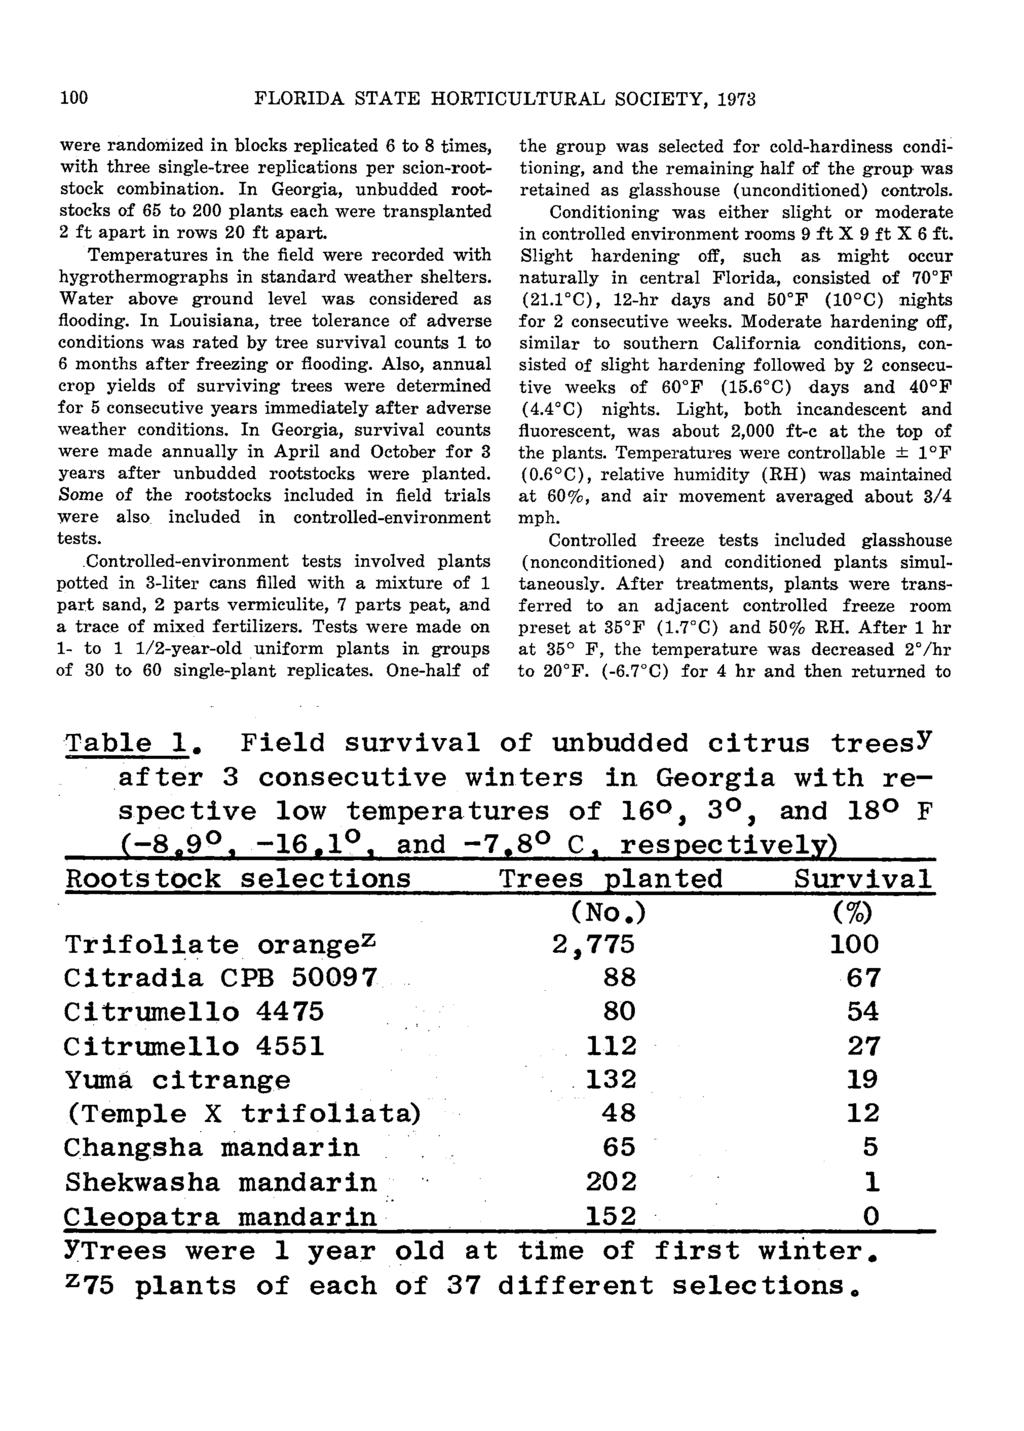 1 FLORIDA STATE HORTICULTURAL SOCIETY, 1973 were randomized in blocks replicated 6 to 8 times, with three single-tree replications per scion-rootstock combination.